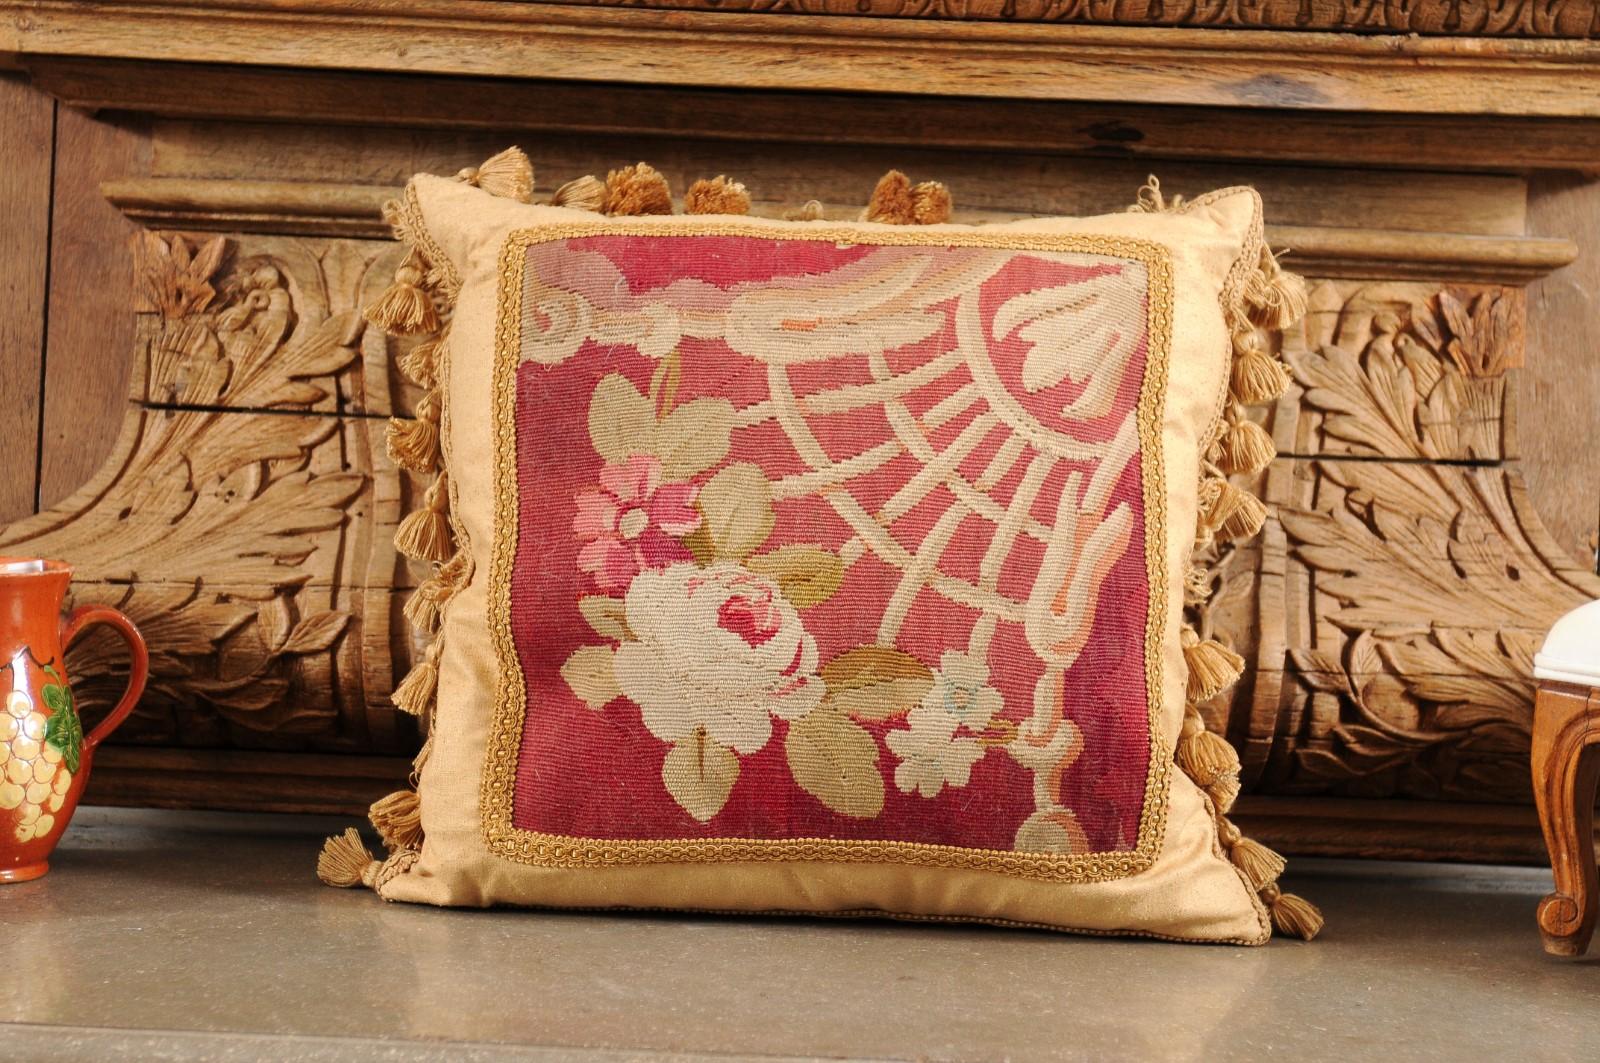 A French Aubusson tapestry pillow from the 19th century, with floral motifs, gallon trim and petite tassels. Created during the 19th century in the Aubusson tapestry manufacture located in central France, this pillow features delicate flowers on a